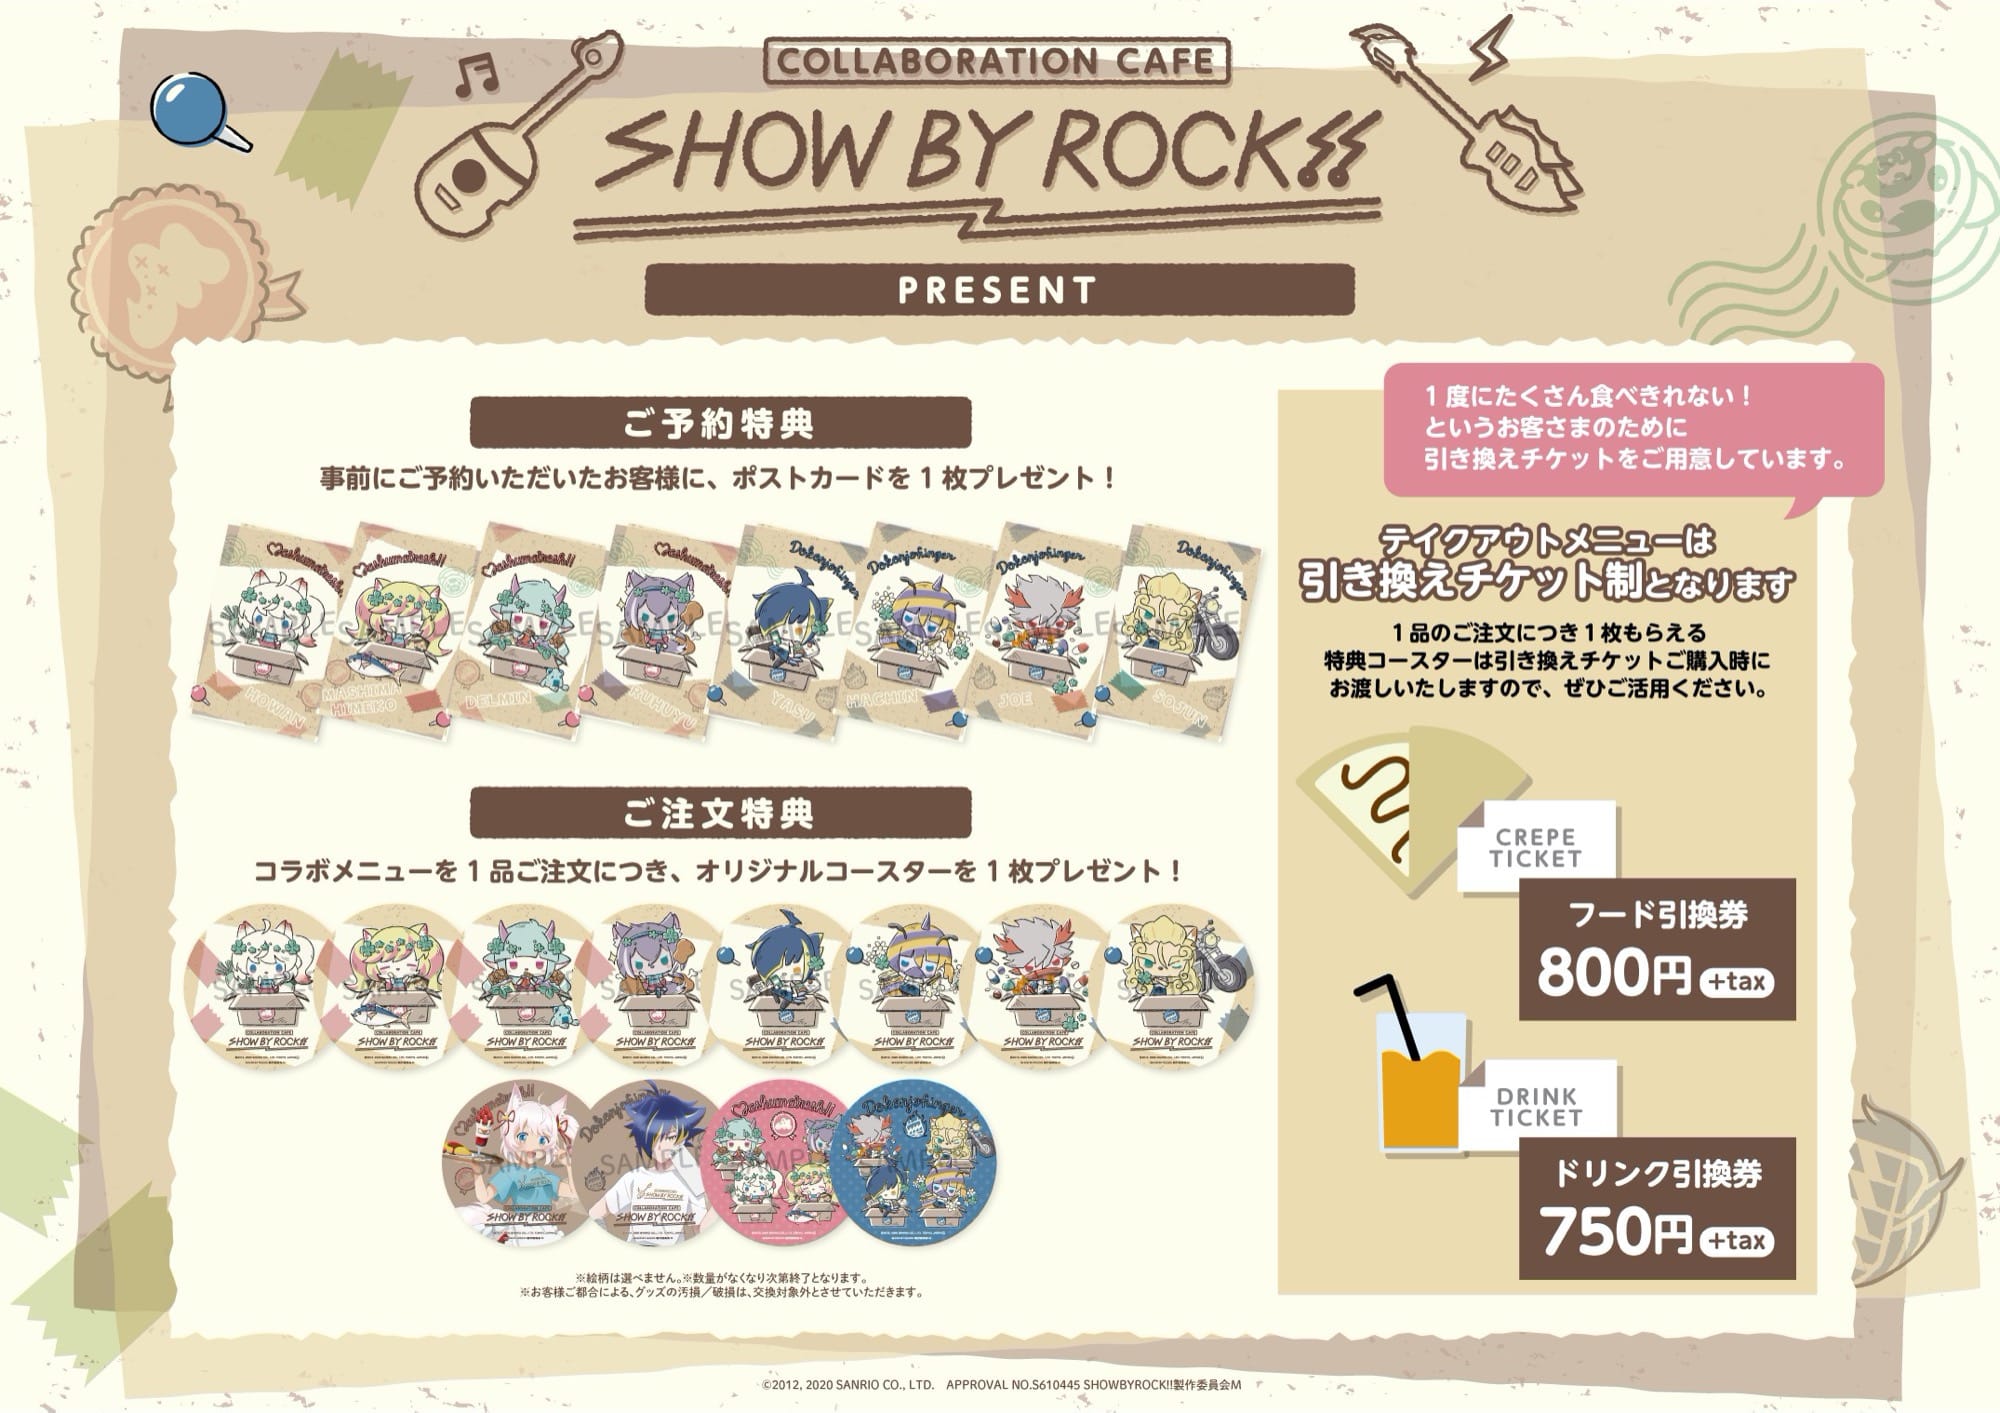 Show By Rock カフェ In Emo Cafe原宿 7 21 8 16 コラボカフェ開催